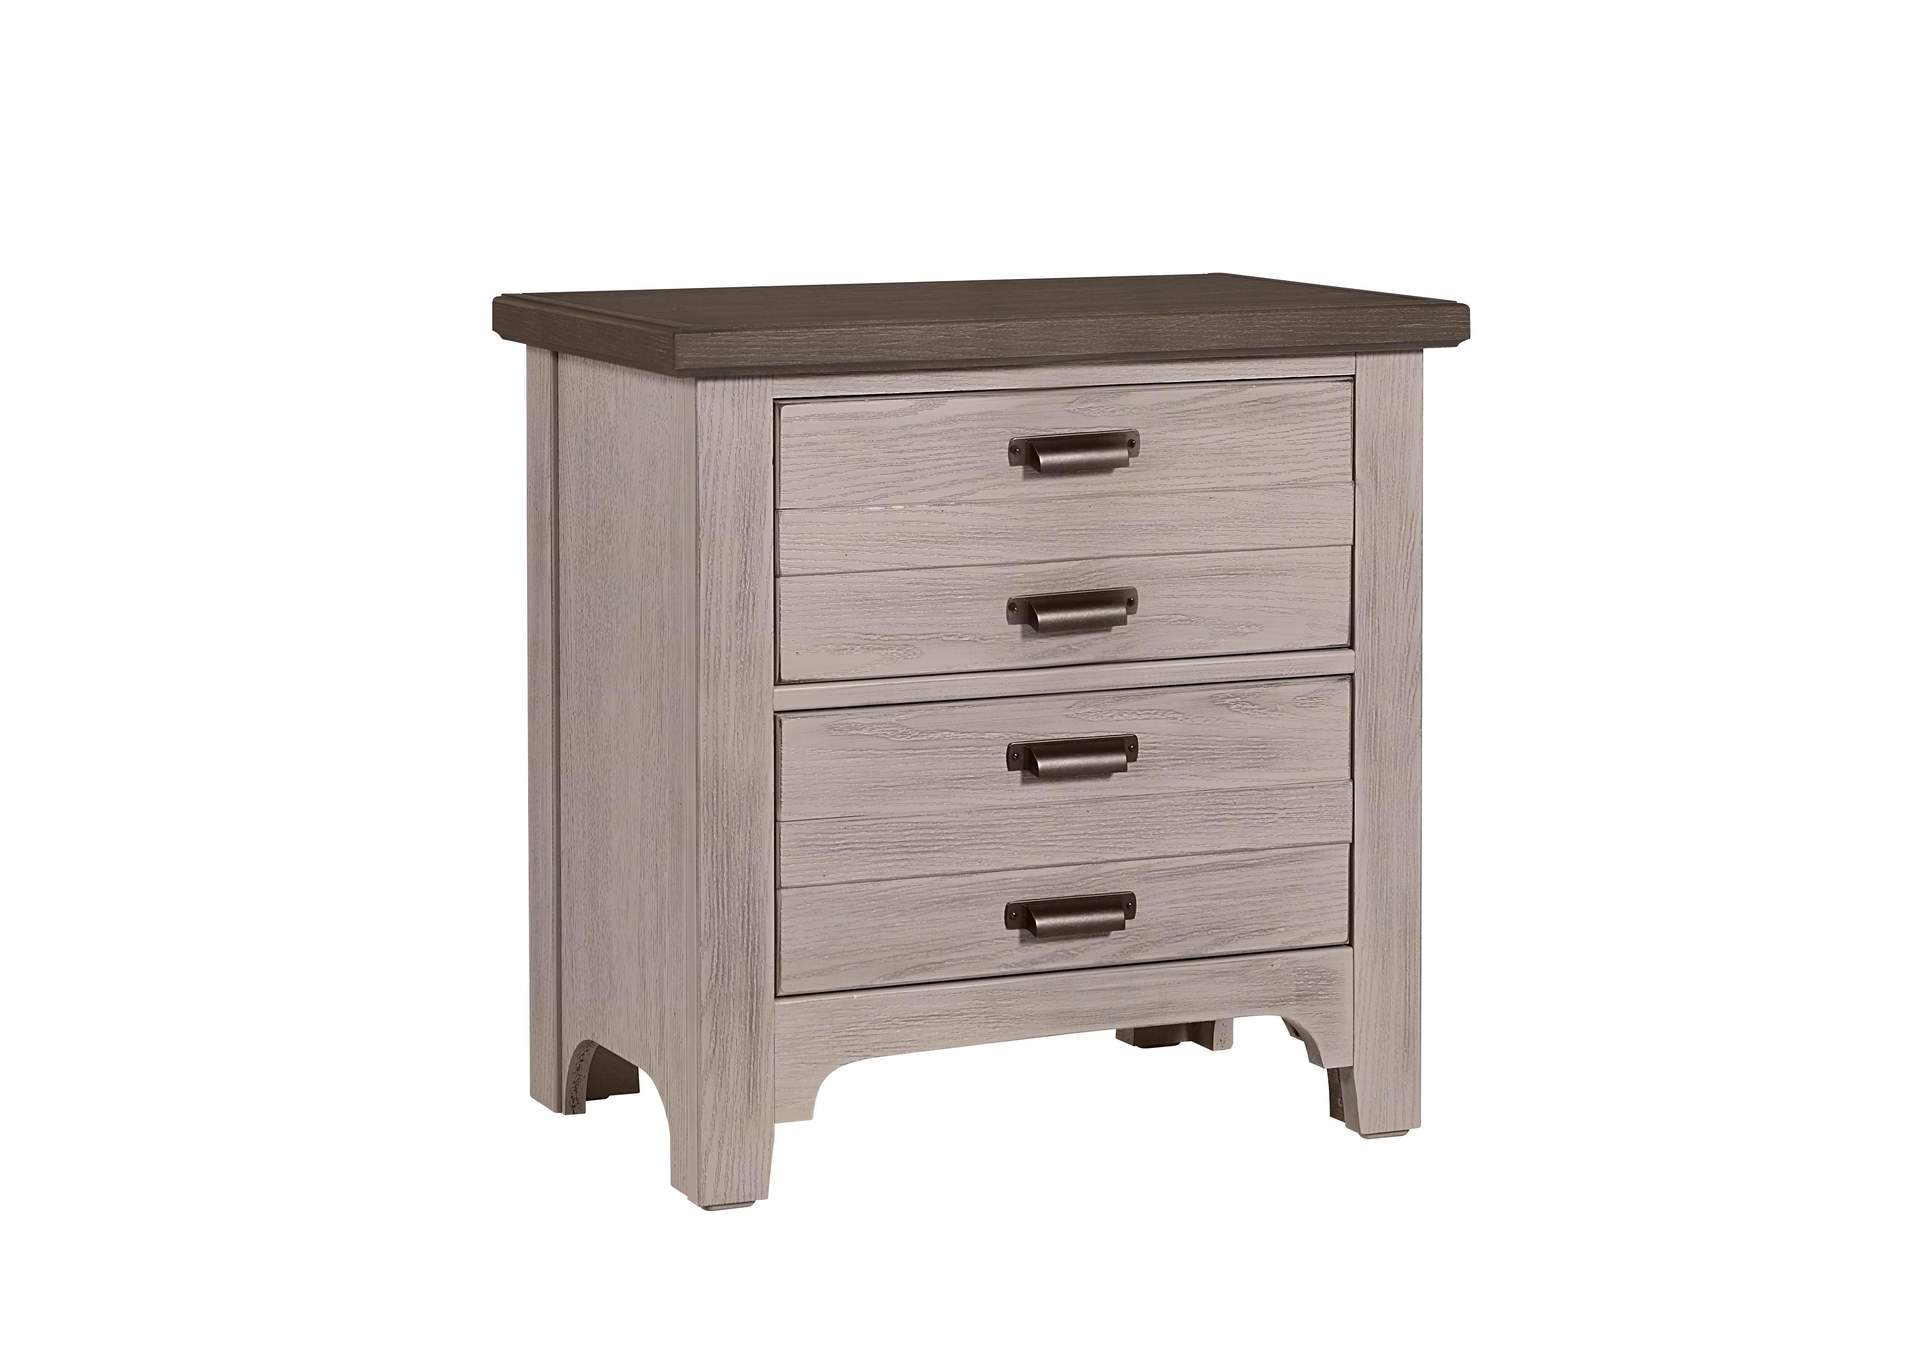 Bungalow Dover Grey with Folkstone Top Night Stand - 2 Drawer,Vaughan-Bassett